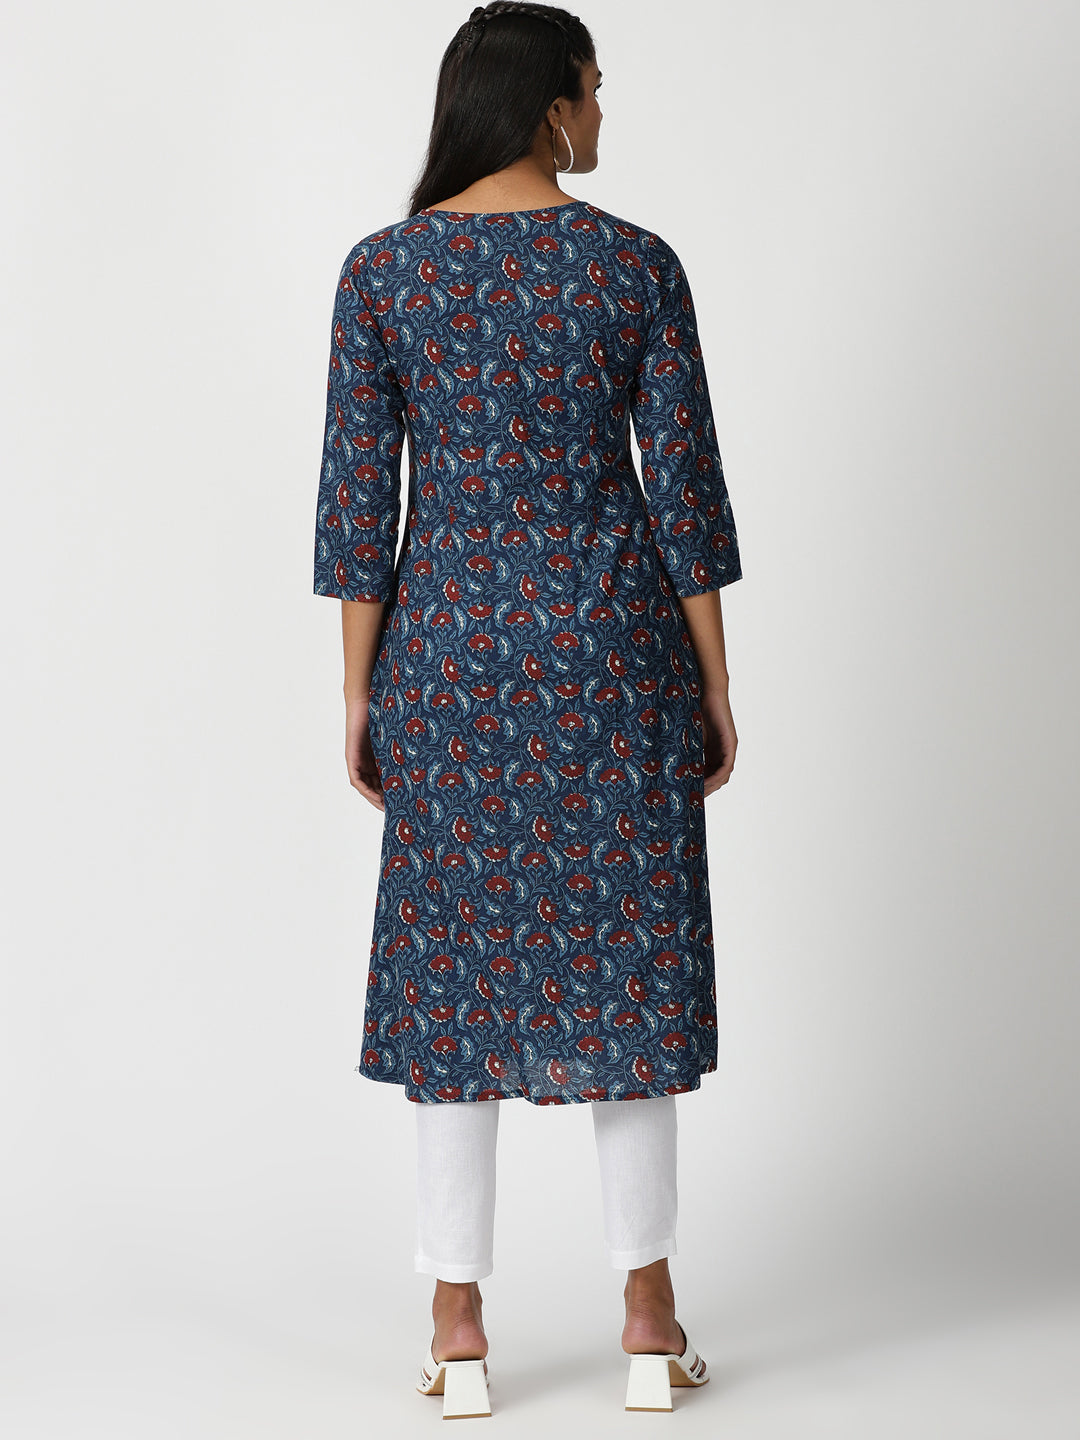 Blue Floral Printed Cotton Kurta with Lucknowi Chikankari Embroidery